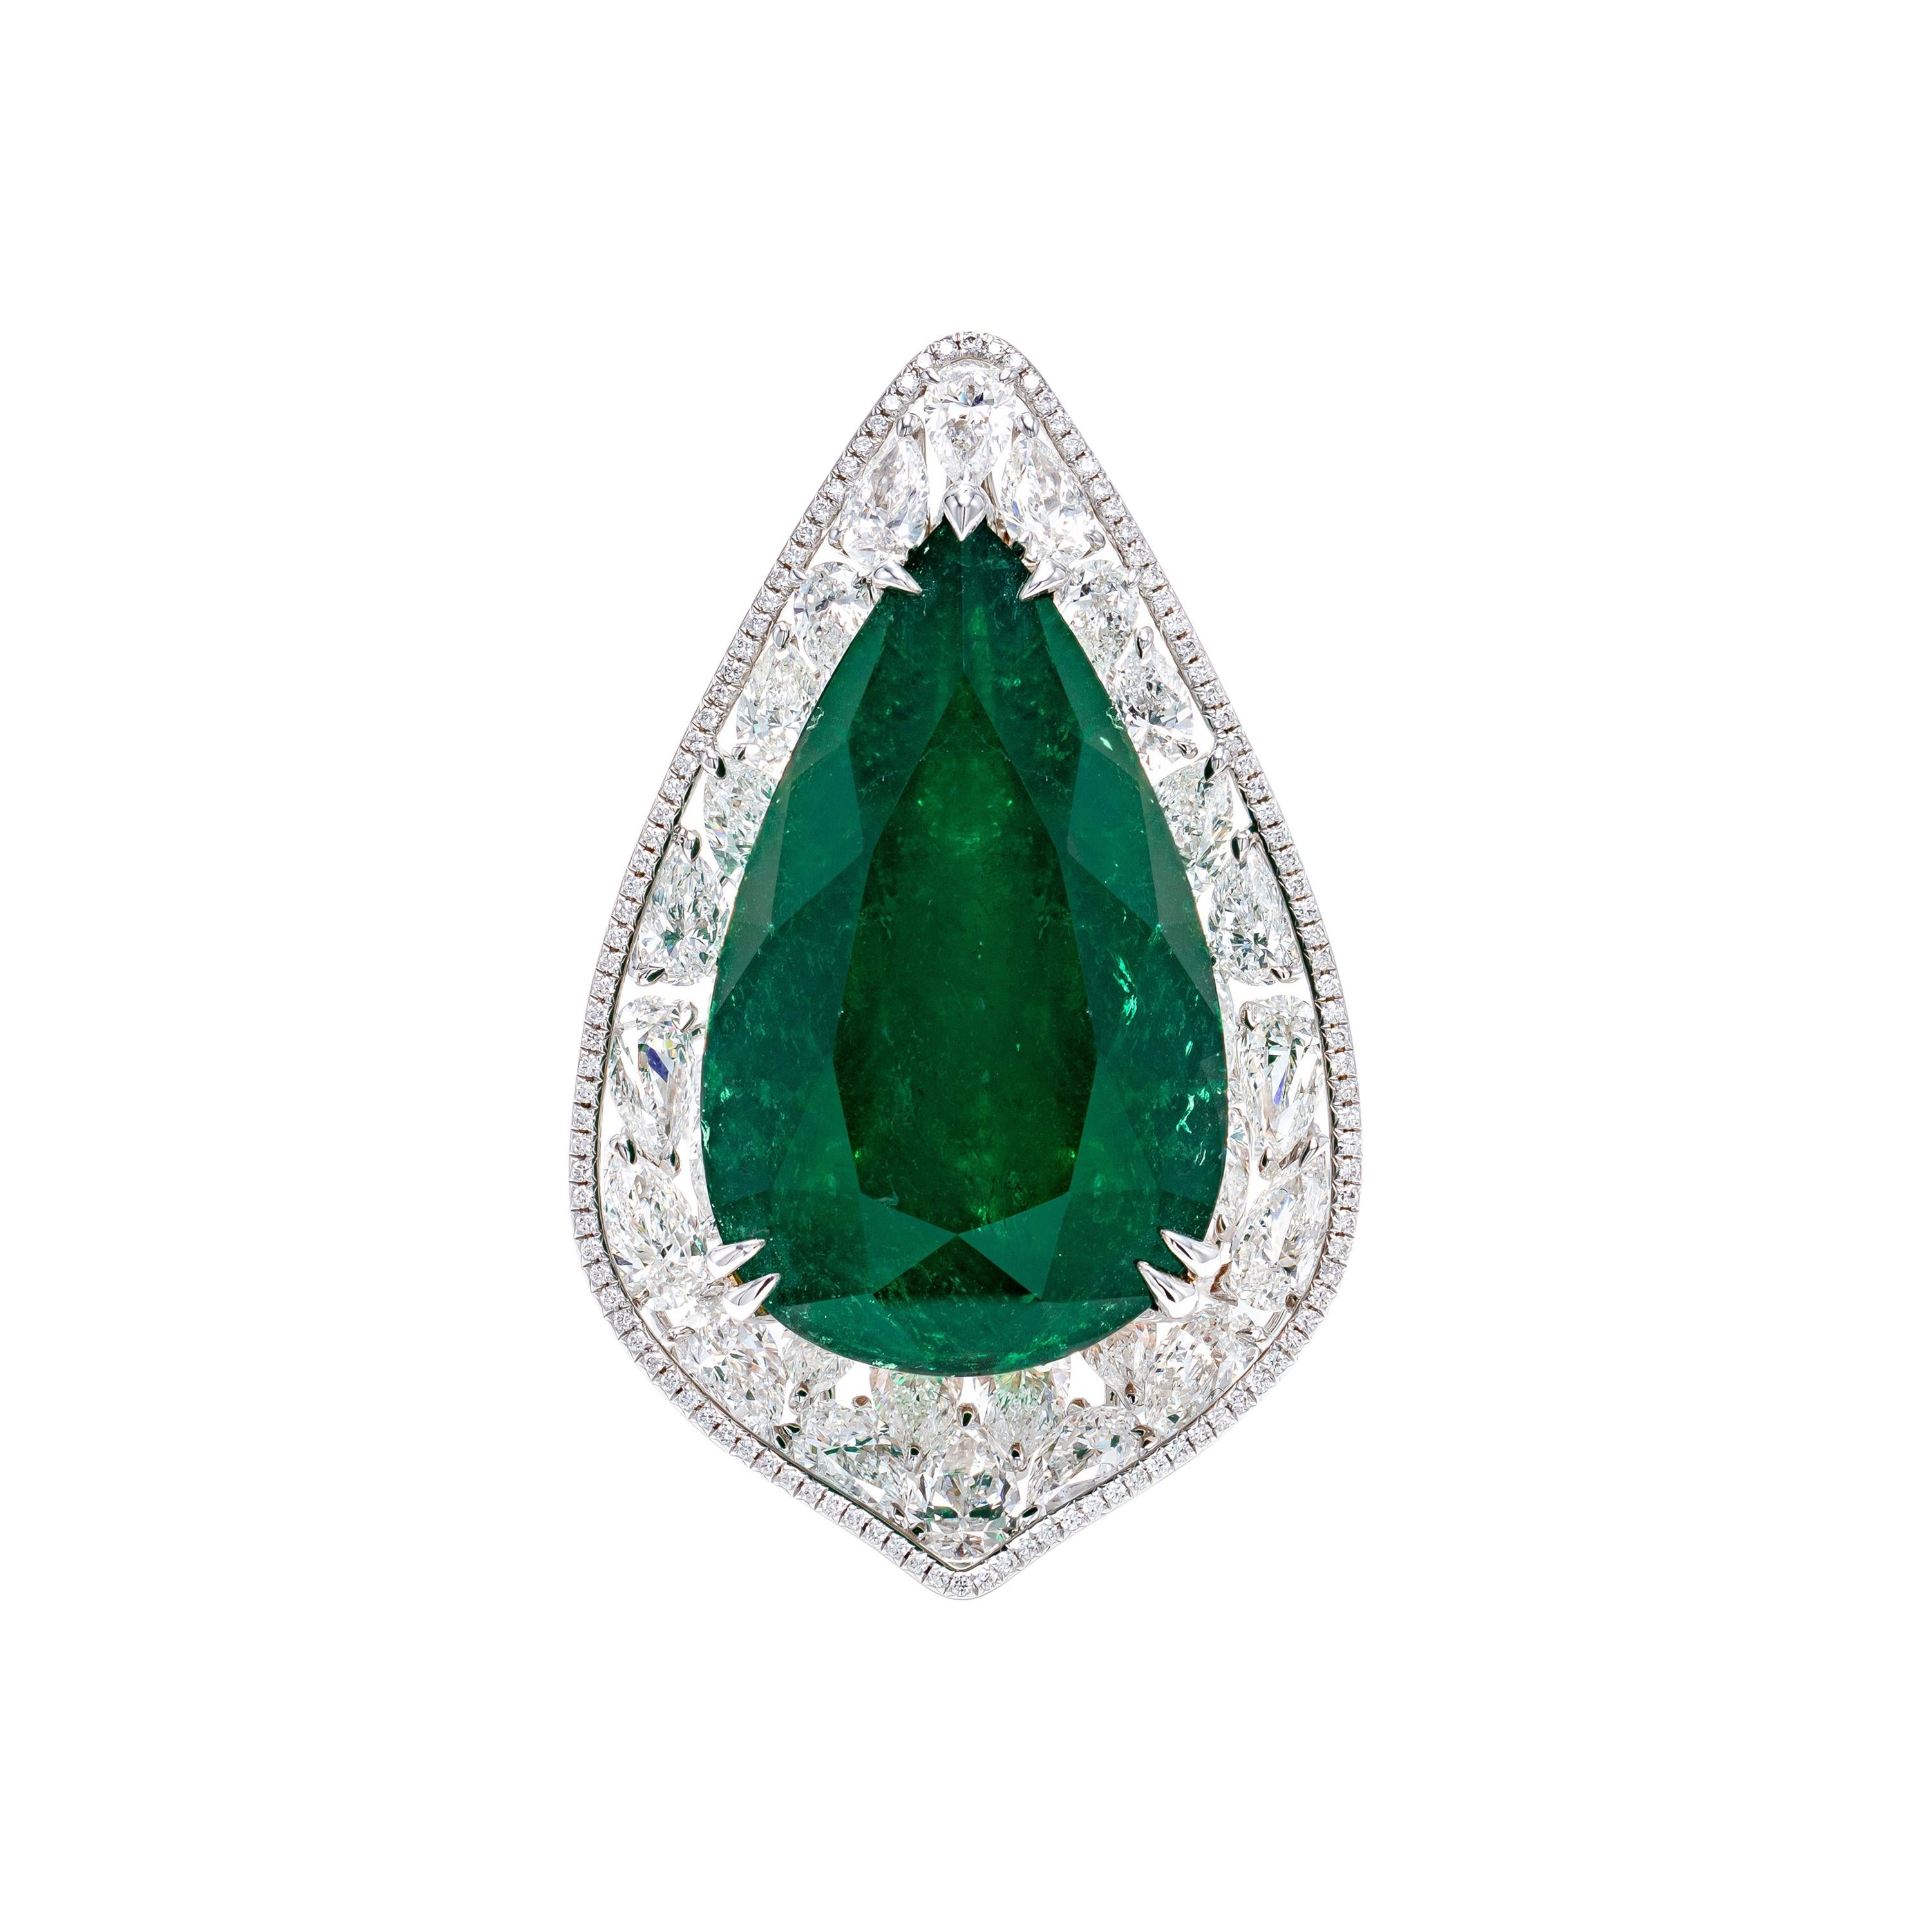 Gubelin Certified 31.16 Carat Colombian Emerald and Diamond Ring in 18K Gold